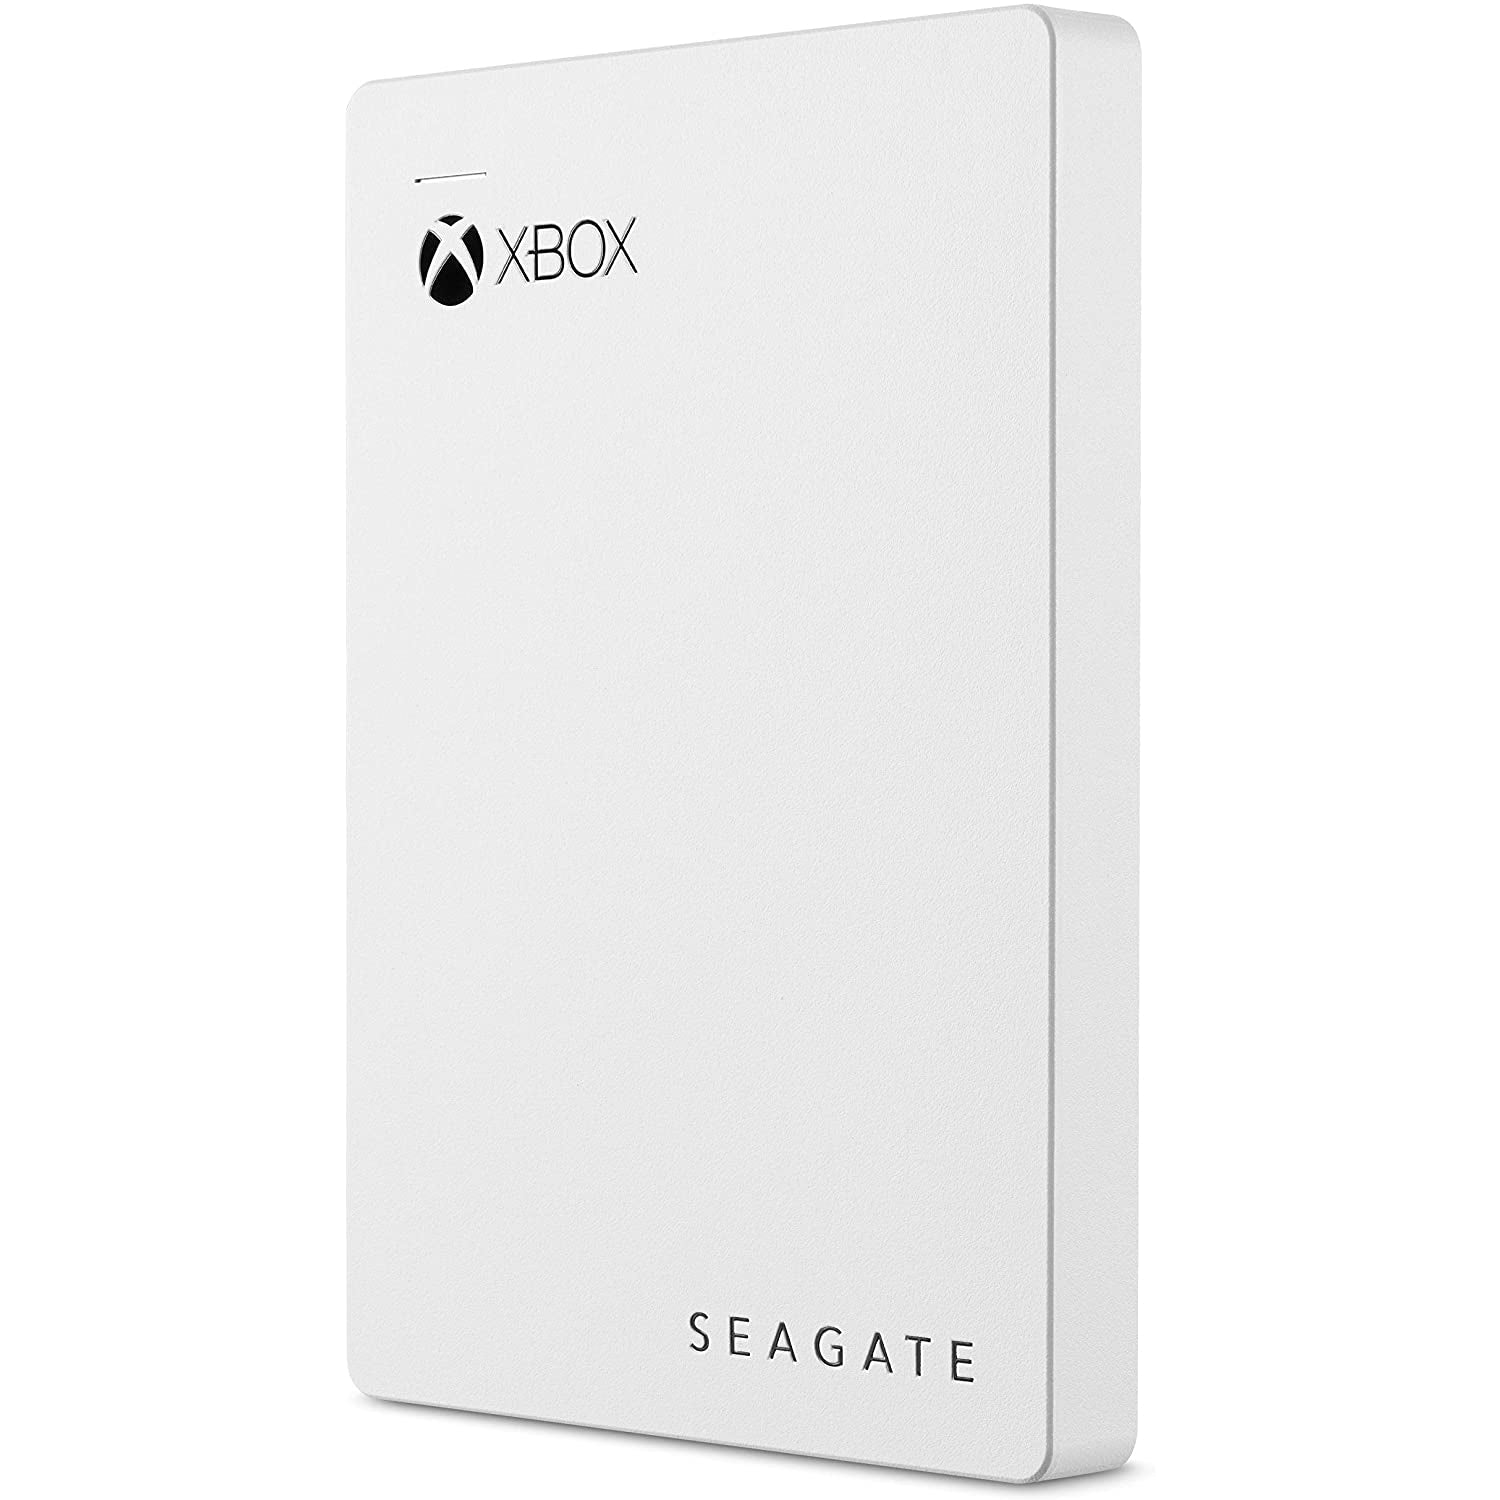 Seagate Game Drive for Xbox, 2 TB, External Hard Drive Portable HDD, Designed for Xbox One